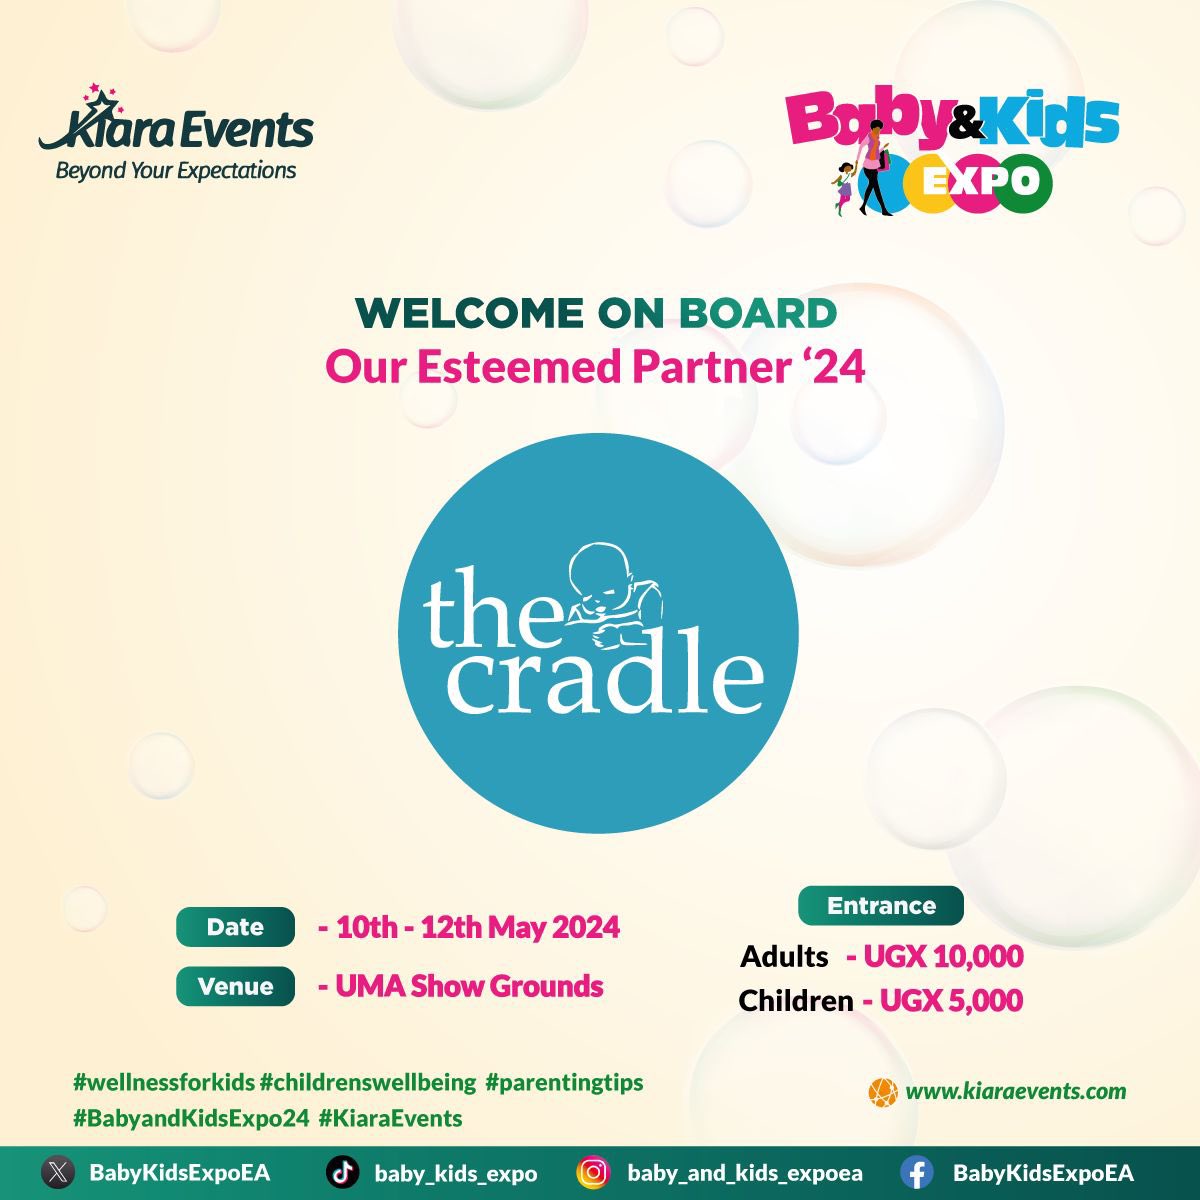 Don’t leave your baby behind 🤗

It’s going to be a fun time with @thecradleug at this year’s Baby & Kids Expo at the UMA Show Grounds from 10th - 12th May 2024.

#BabyandKidsExpo24 
#KiaraEvents